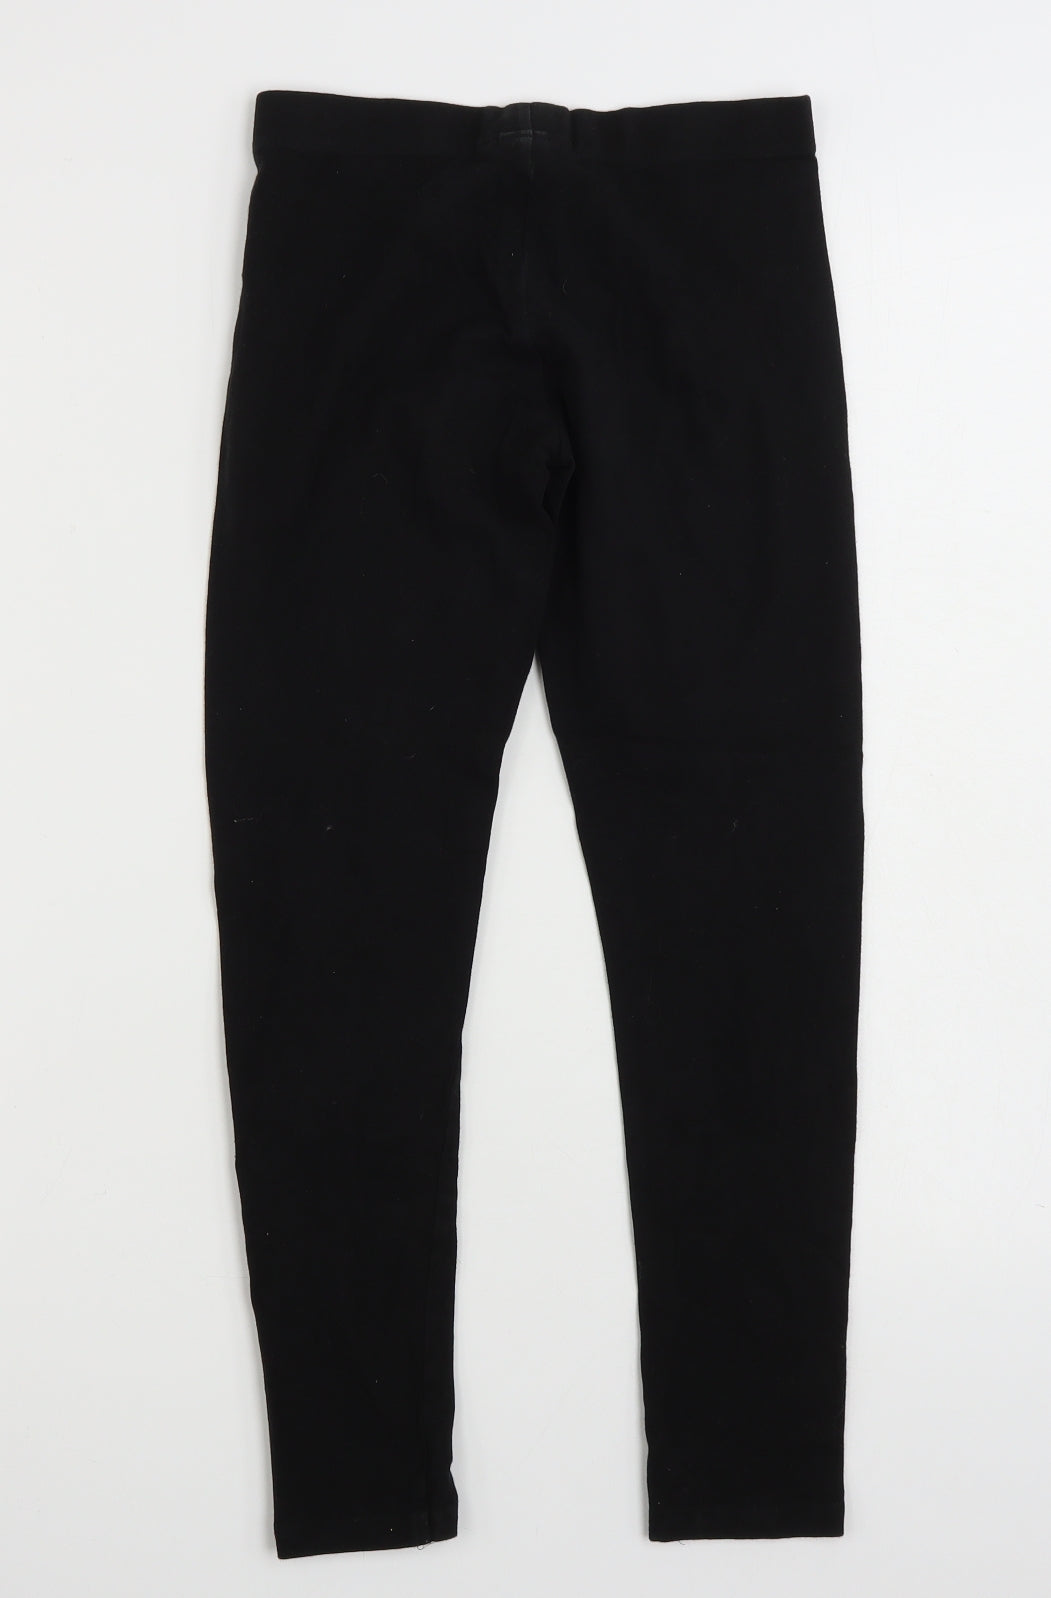 NEXT Girls Black  Cotton Jegging Trousers Size 12 Years  Slim